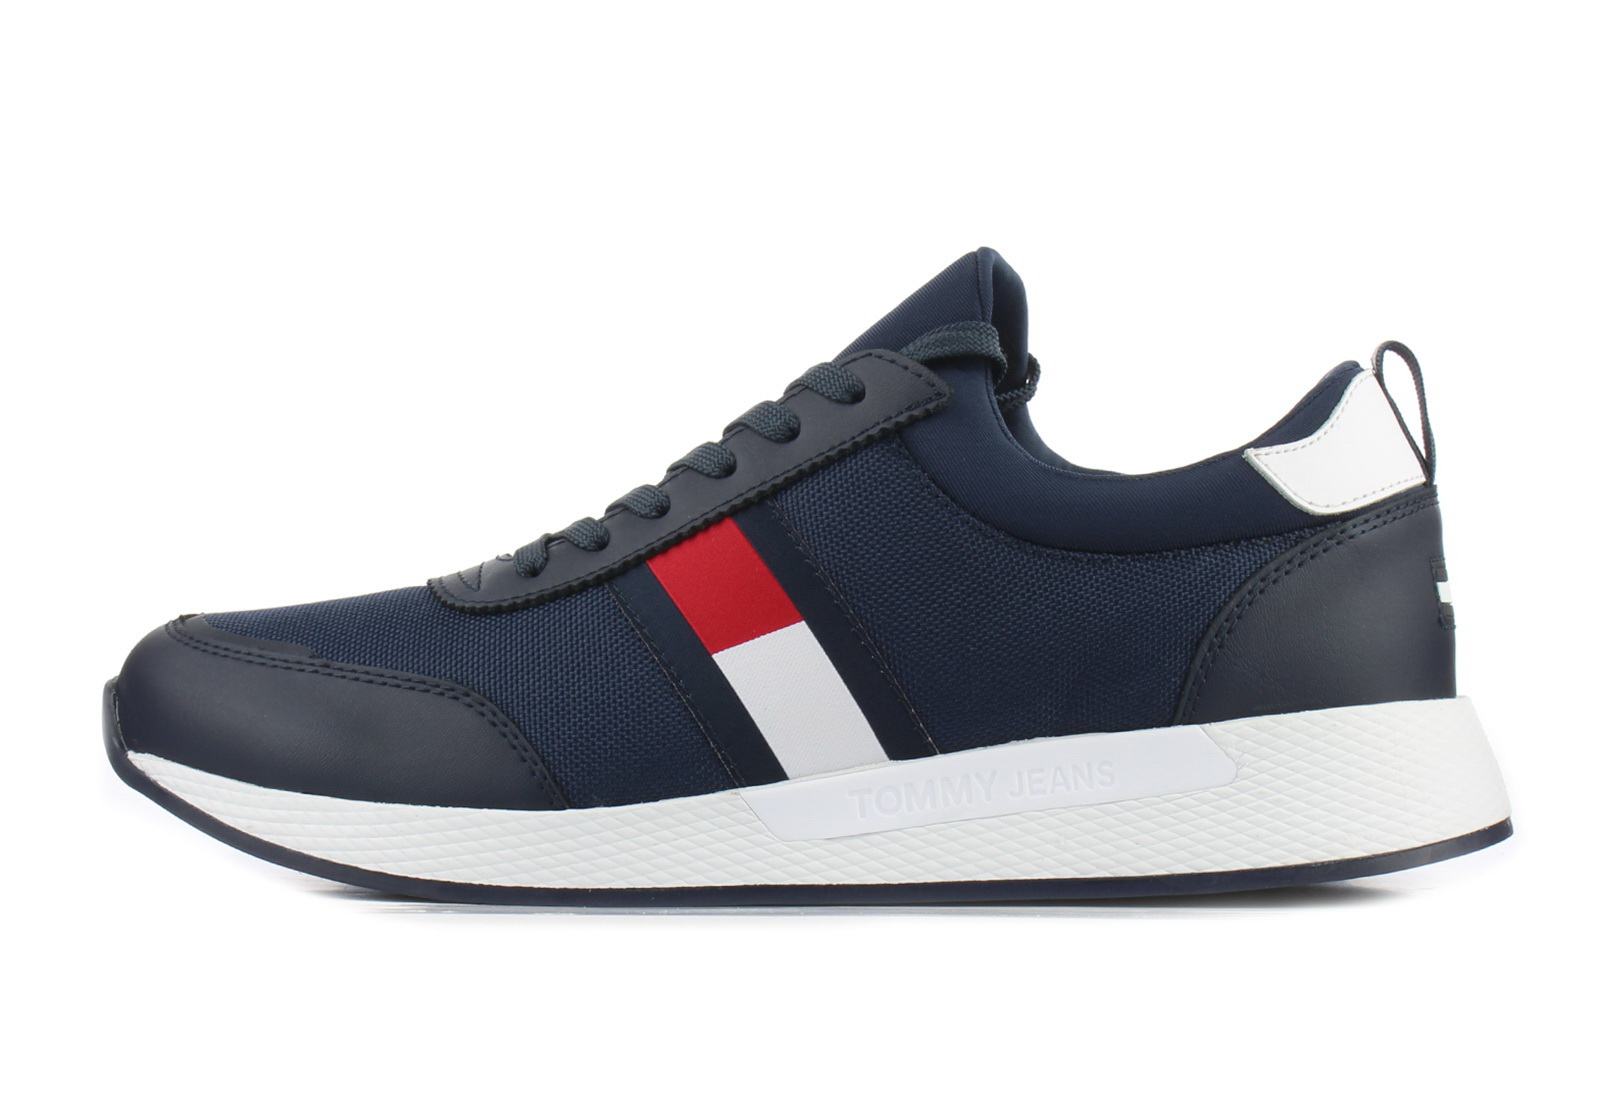 Tommy Sneakers - Blake 15c EM0-0632-C87 - Online shop for sneakers, shoes and